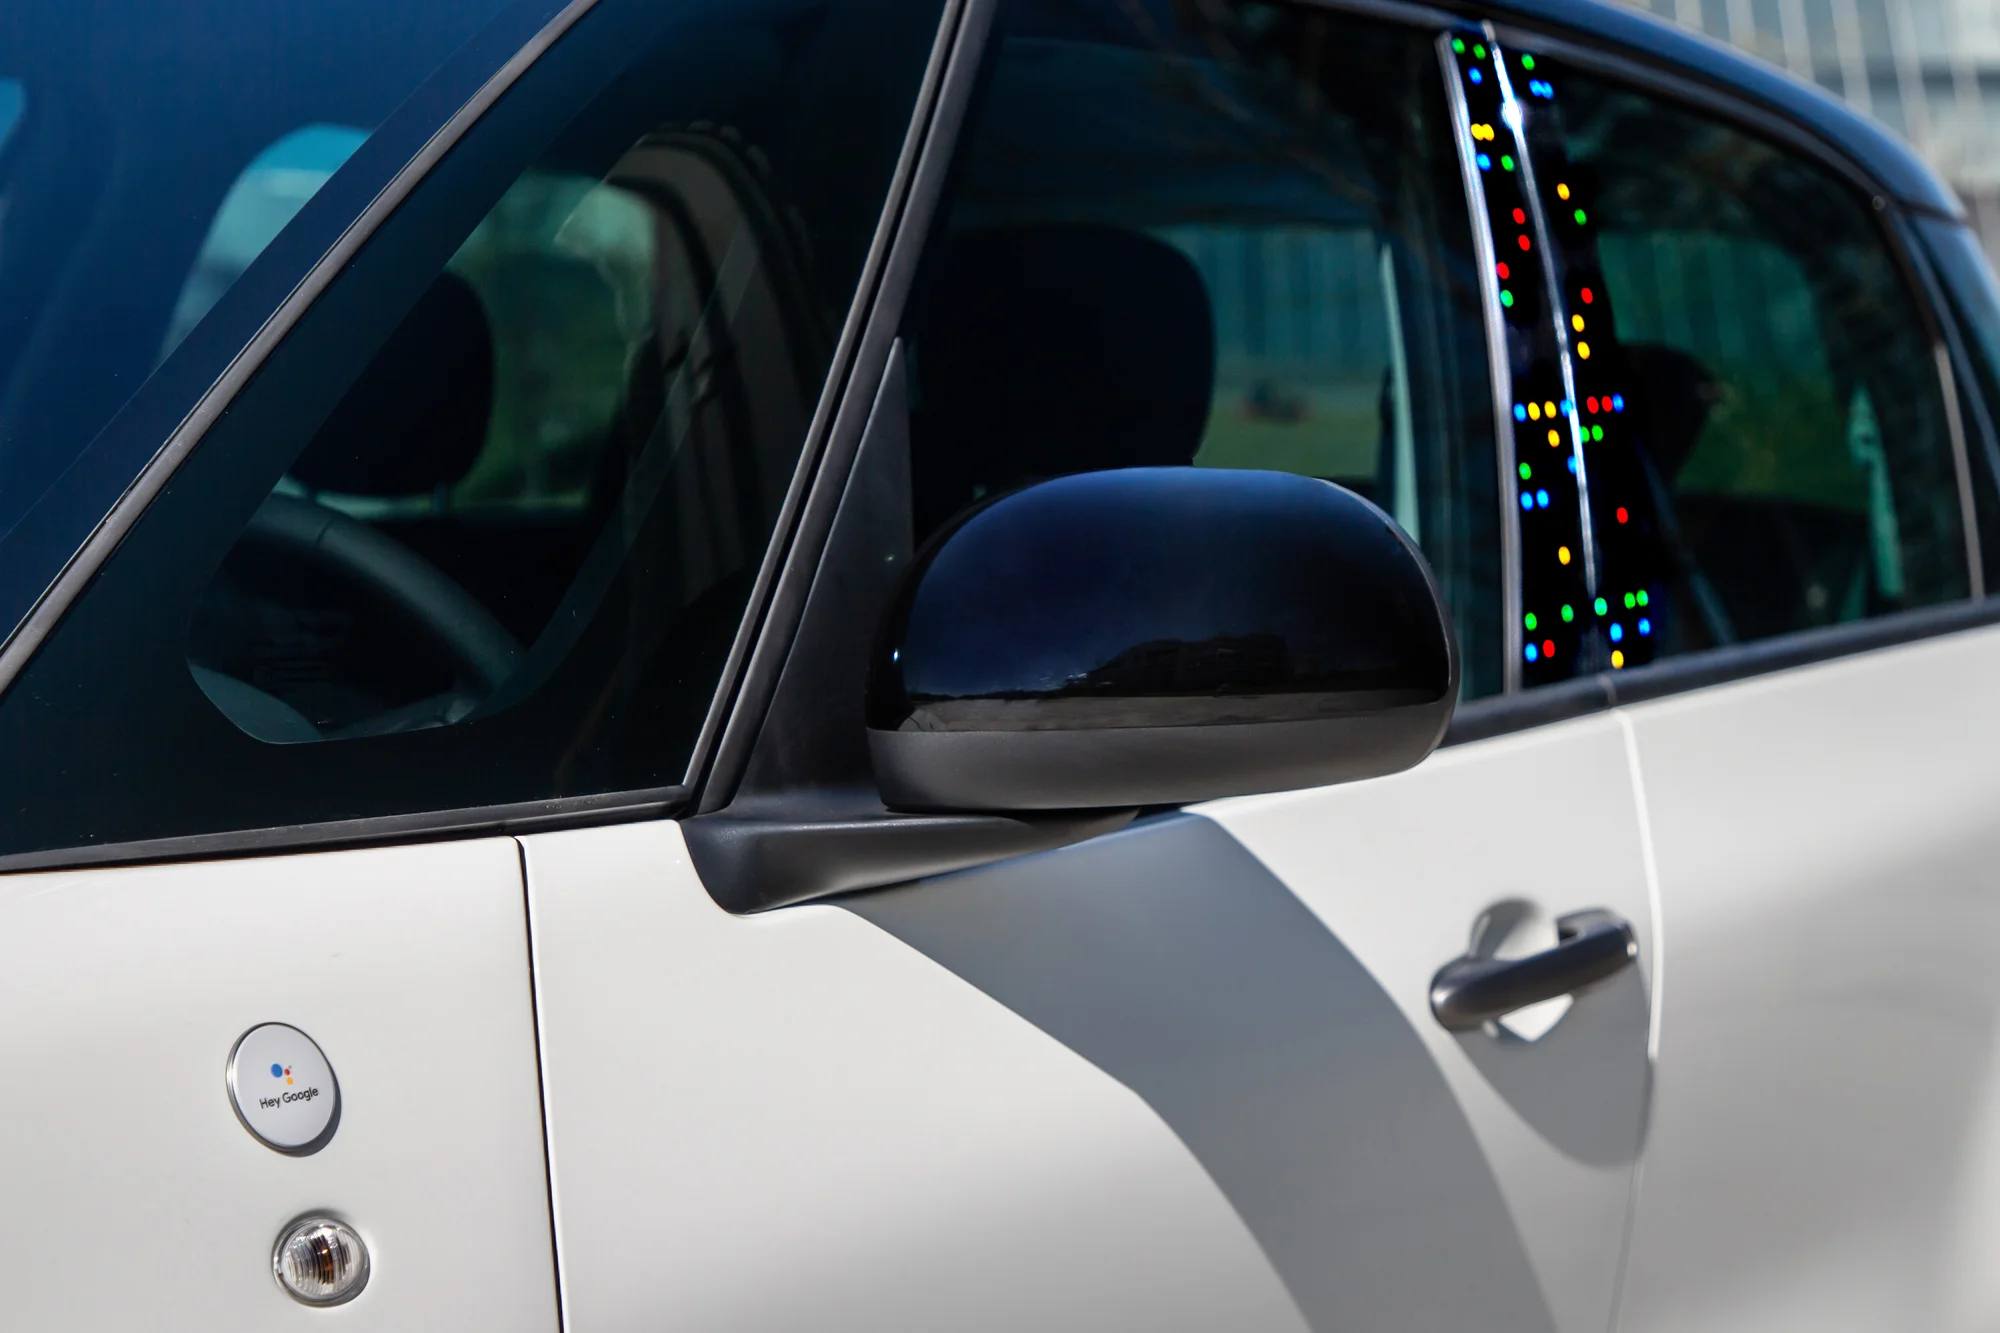 A close-up of the driver side door of the Fiat 500 showing the "hey Google" branding.